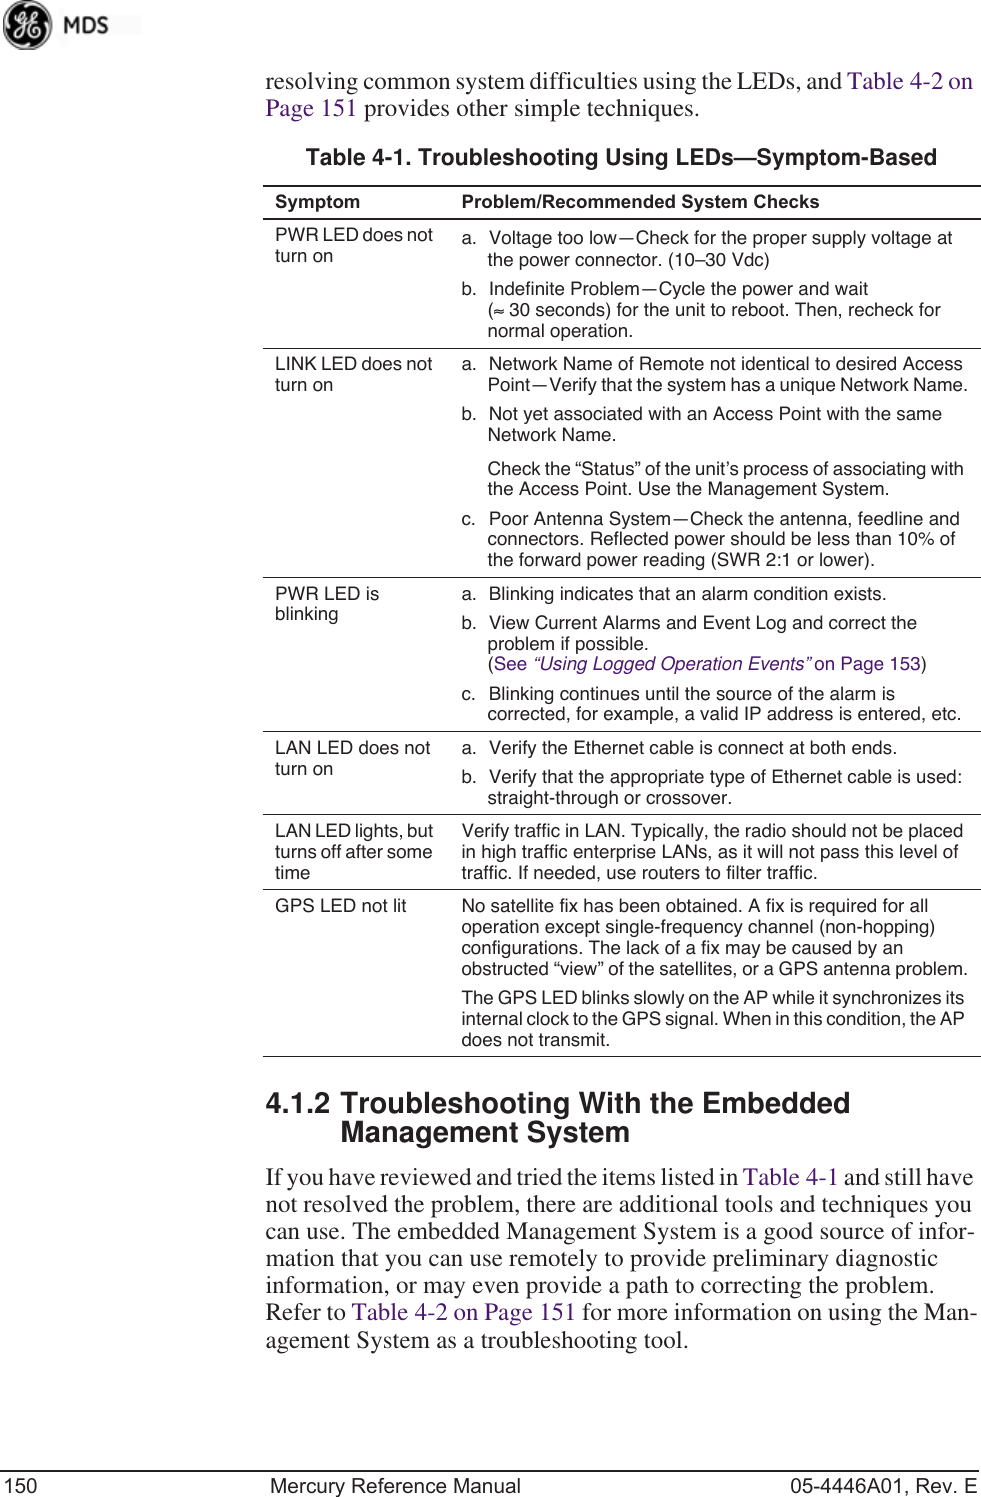 150 Mercury Reference Manual 05-4446A01, Rev. Eresolving common system difficulties using the LEDs, and Table 4-2 on Page 151 provides other simple techniques. 4.1.2 Troubleshooting With the Embedded Management SystemIf you have reviewed and tried the items listed in Table 4-1 and still have not resolved the problem, there are additional tools and techniques you can use. The embedded Management System is a good source of infor-mation that you can use remotely to provide preliminary diagnostic information, or may even provide a path to correcting the problem. Refer to Table 4-2 on Page 151 for more information on using the Man-agement System as a troubleshooting tool.Table 4-1. Troubleshooting Using LEDs—Symptom-BasedSymptom Problem/Recommended System ChecksPWR LED does not turn ona. Voltage too low—Check for the proper supply voltage at the power connector. (10–30 Vdc)b. Indefinite Problem—Cycle the power and wait (≈ 30 seconds) for the unit to reboot. Then, recheck for normal operation.LINK LED does not turn ona. Network Name of Remote not identical to desired Access Point—Verify that the system has a unique Network Name.b. Not yet associated with an Access Point with the same Network Name.Check the “Status” of the unit’s process of associating with the Access Point. Use the Management System.c. Poor Antenna System—Check the antenna, feedline and connectors. Reflected power should be less than 10% of the forward power reading (SWR 2:1 or lower). PWR LED is blinkinga. Blinking indicates that an alarm condition exists. b. View Current Alarms and Event Log and correct the problem if possible.(See “Using Logged Operation Events” on Page 153)c. Blinking continues until the source of the alarm is corrected, for example, a valid IP address is entered, etc.LAN LED does not turn ona. Verify the Ethernet cable is connect at both ends.b. Verify that the appropriate type of Ethernet cable is used: straight-through or crossover.LAN LED lights, but turns off after some timeVerify traffic in LAN. Typically, the radio should not be placed in high traffic enterprise LANs, as it will not pass this level of traffic. If needed, use routers to filter traffic.GPS LED not lit No satellite fix has been obtained. A fix is required for all operation except single-frequency channel (non-hopping) configurations. The lack of a fix may be caused by an obstructed “view” of the satellites, or a GPS antenna problem.The GPS LED blinks slowly on the AP while it synchronizes its internal clock to the GPS signal. When in this condition, the AP does not transmit.